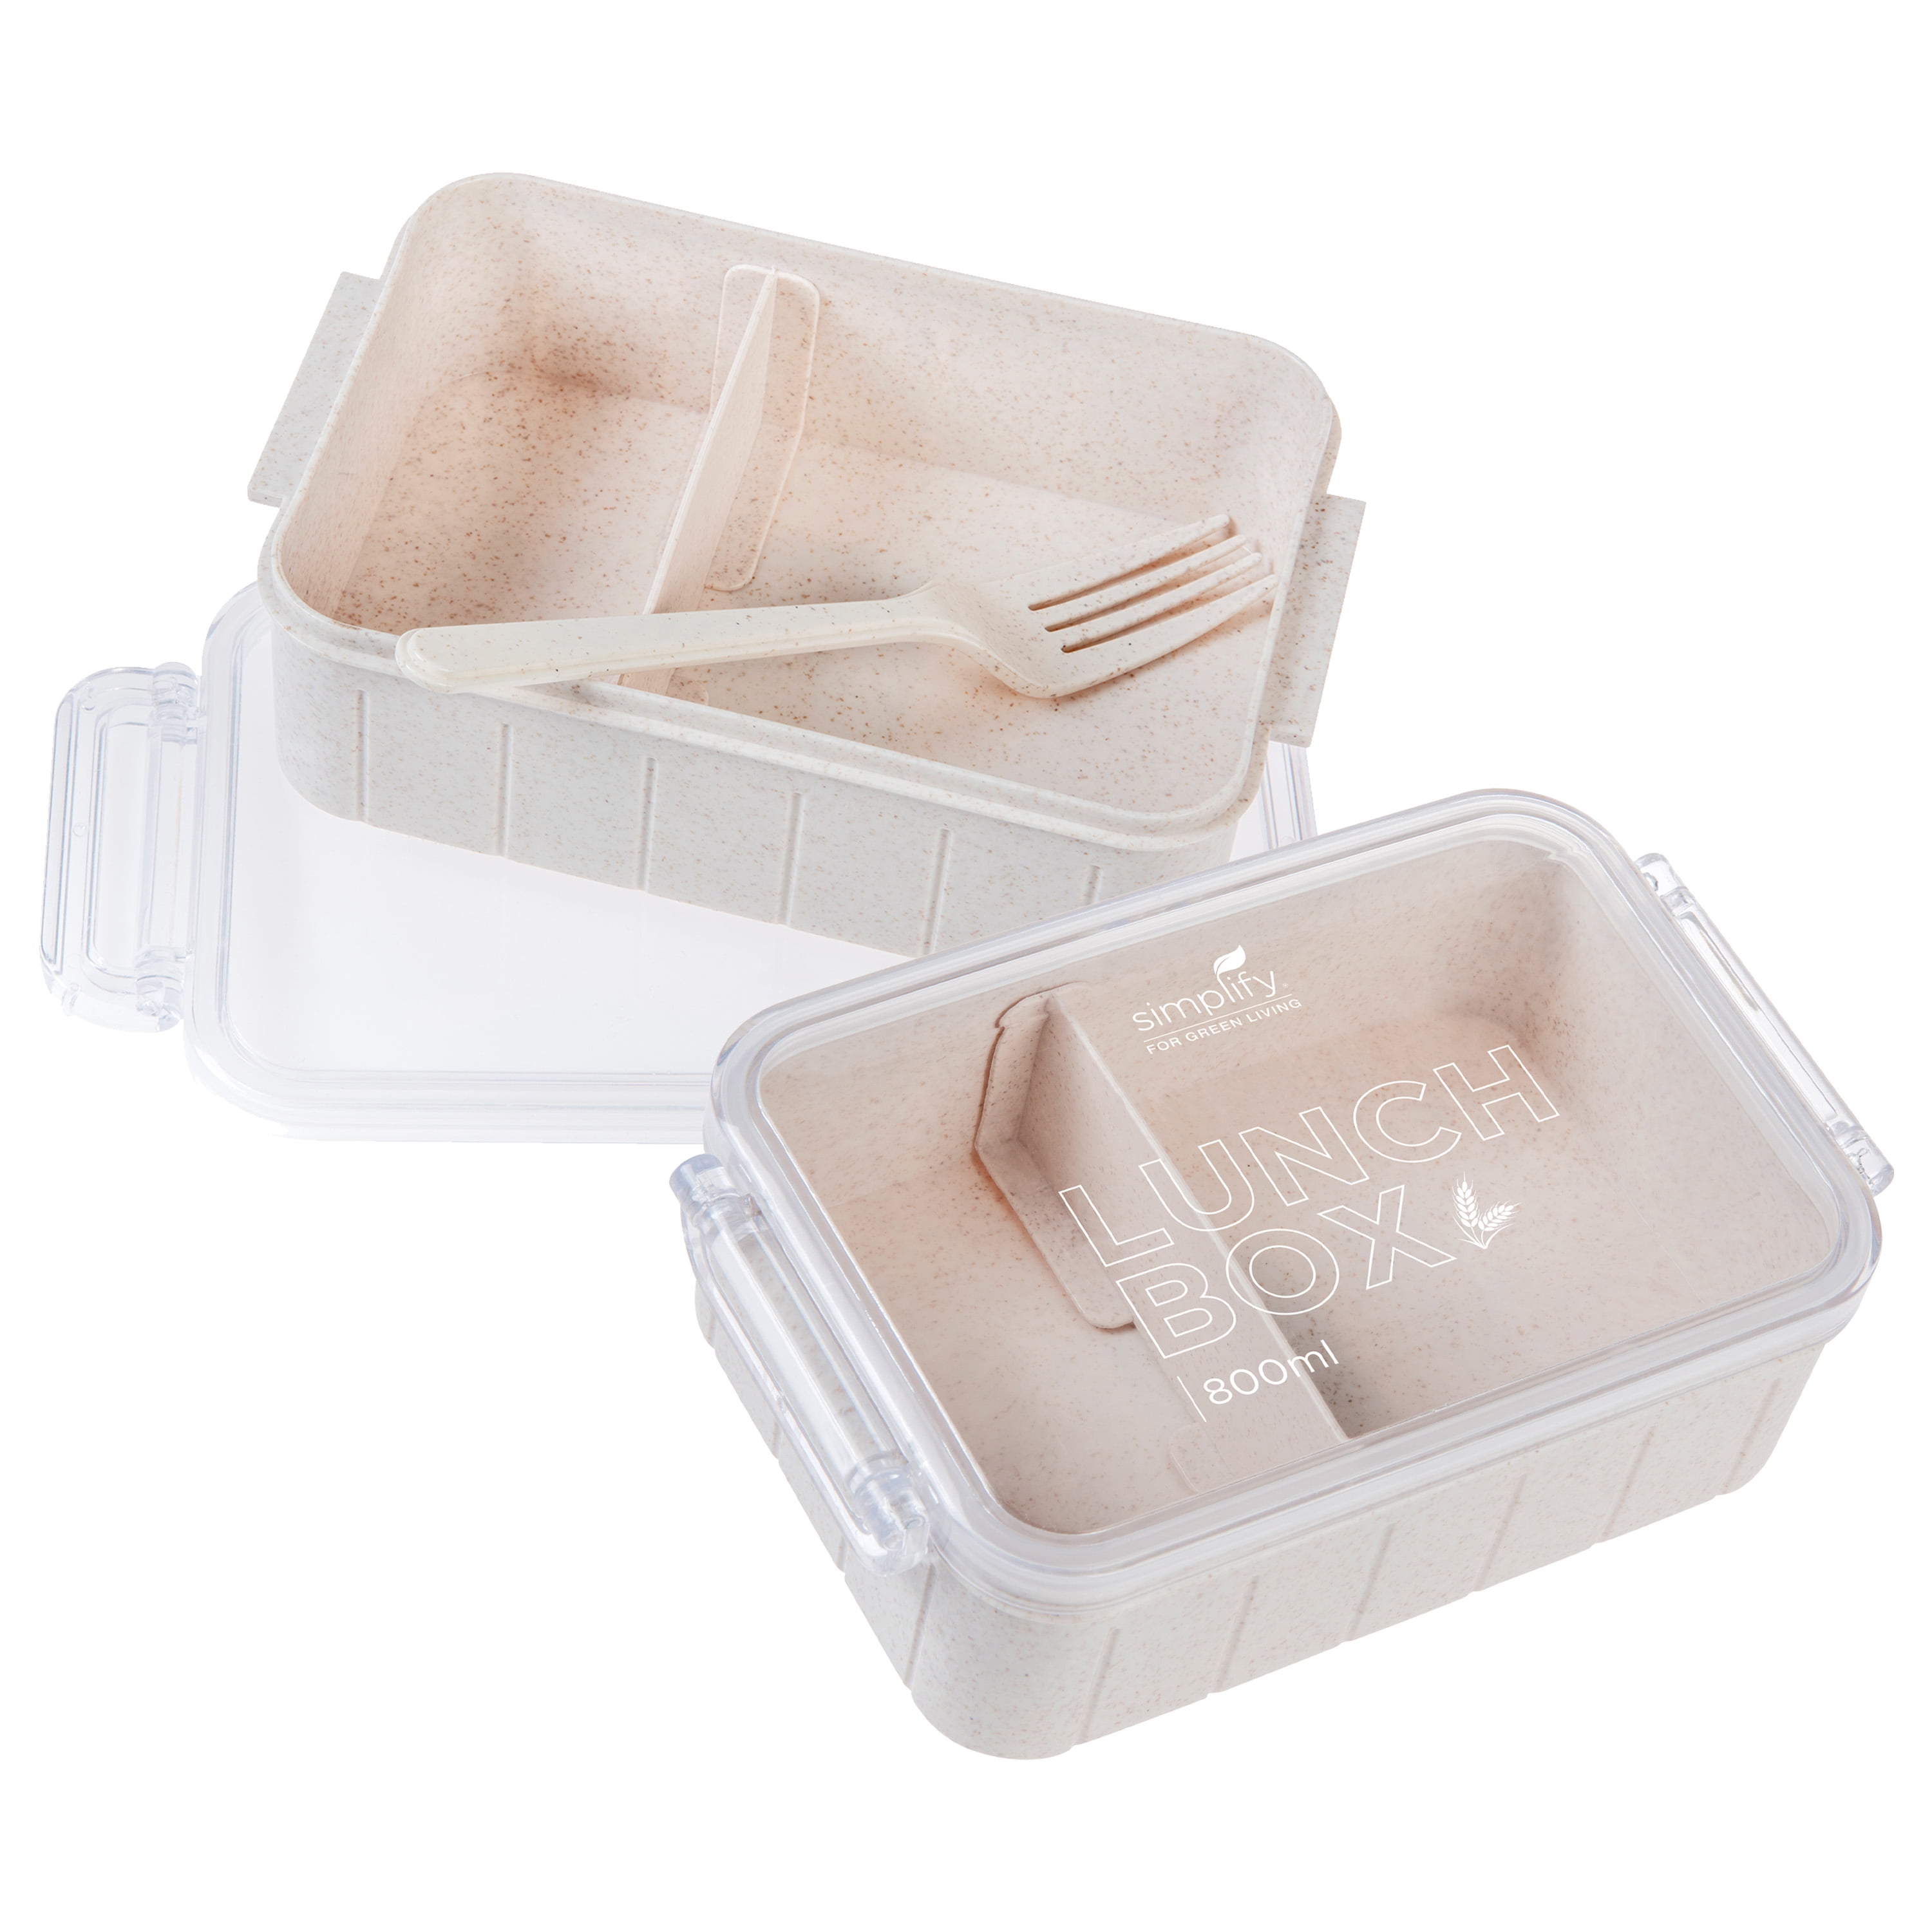 Silicone Square Lunch Box  Reusable, Eco-Friendly Food Containers – Sili  Home Co.